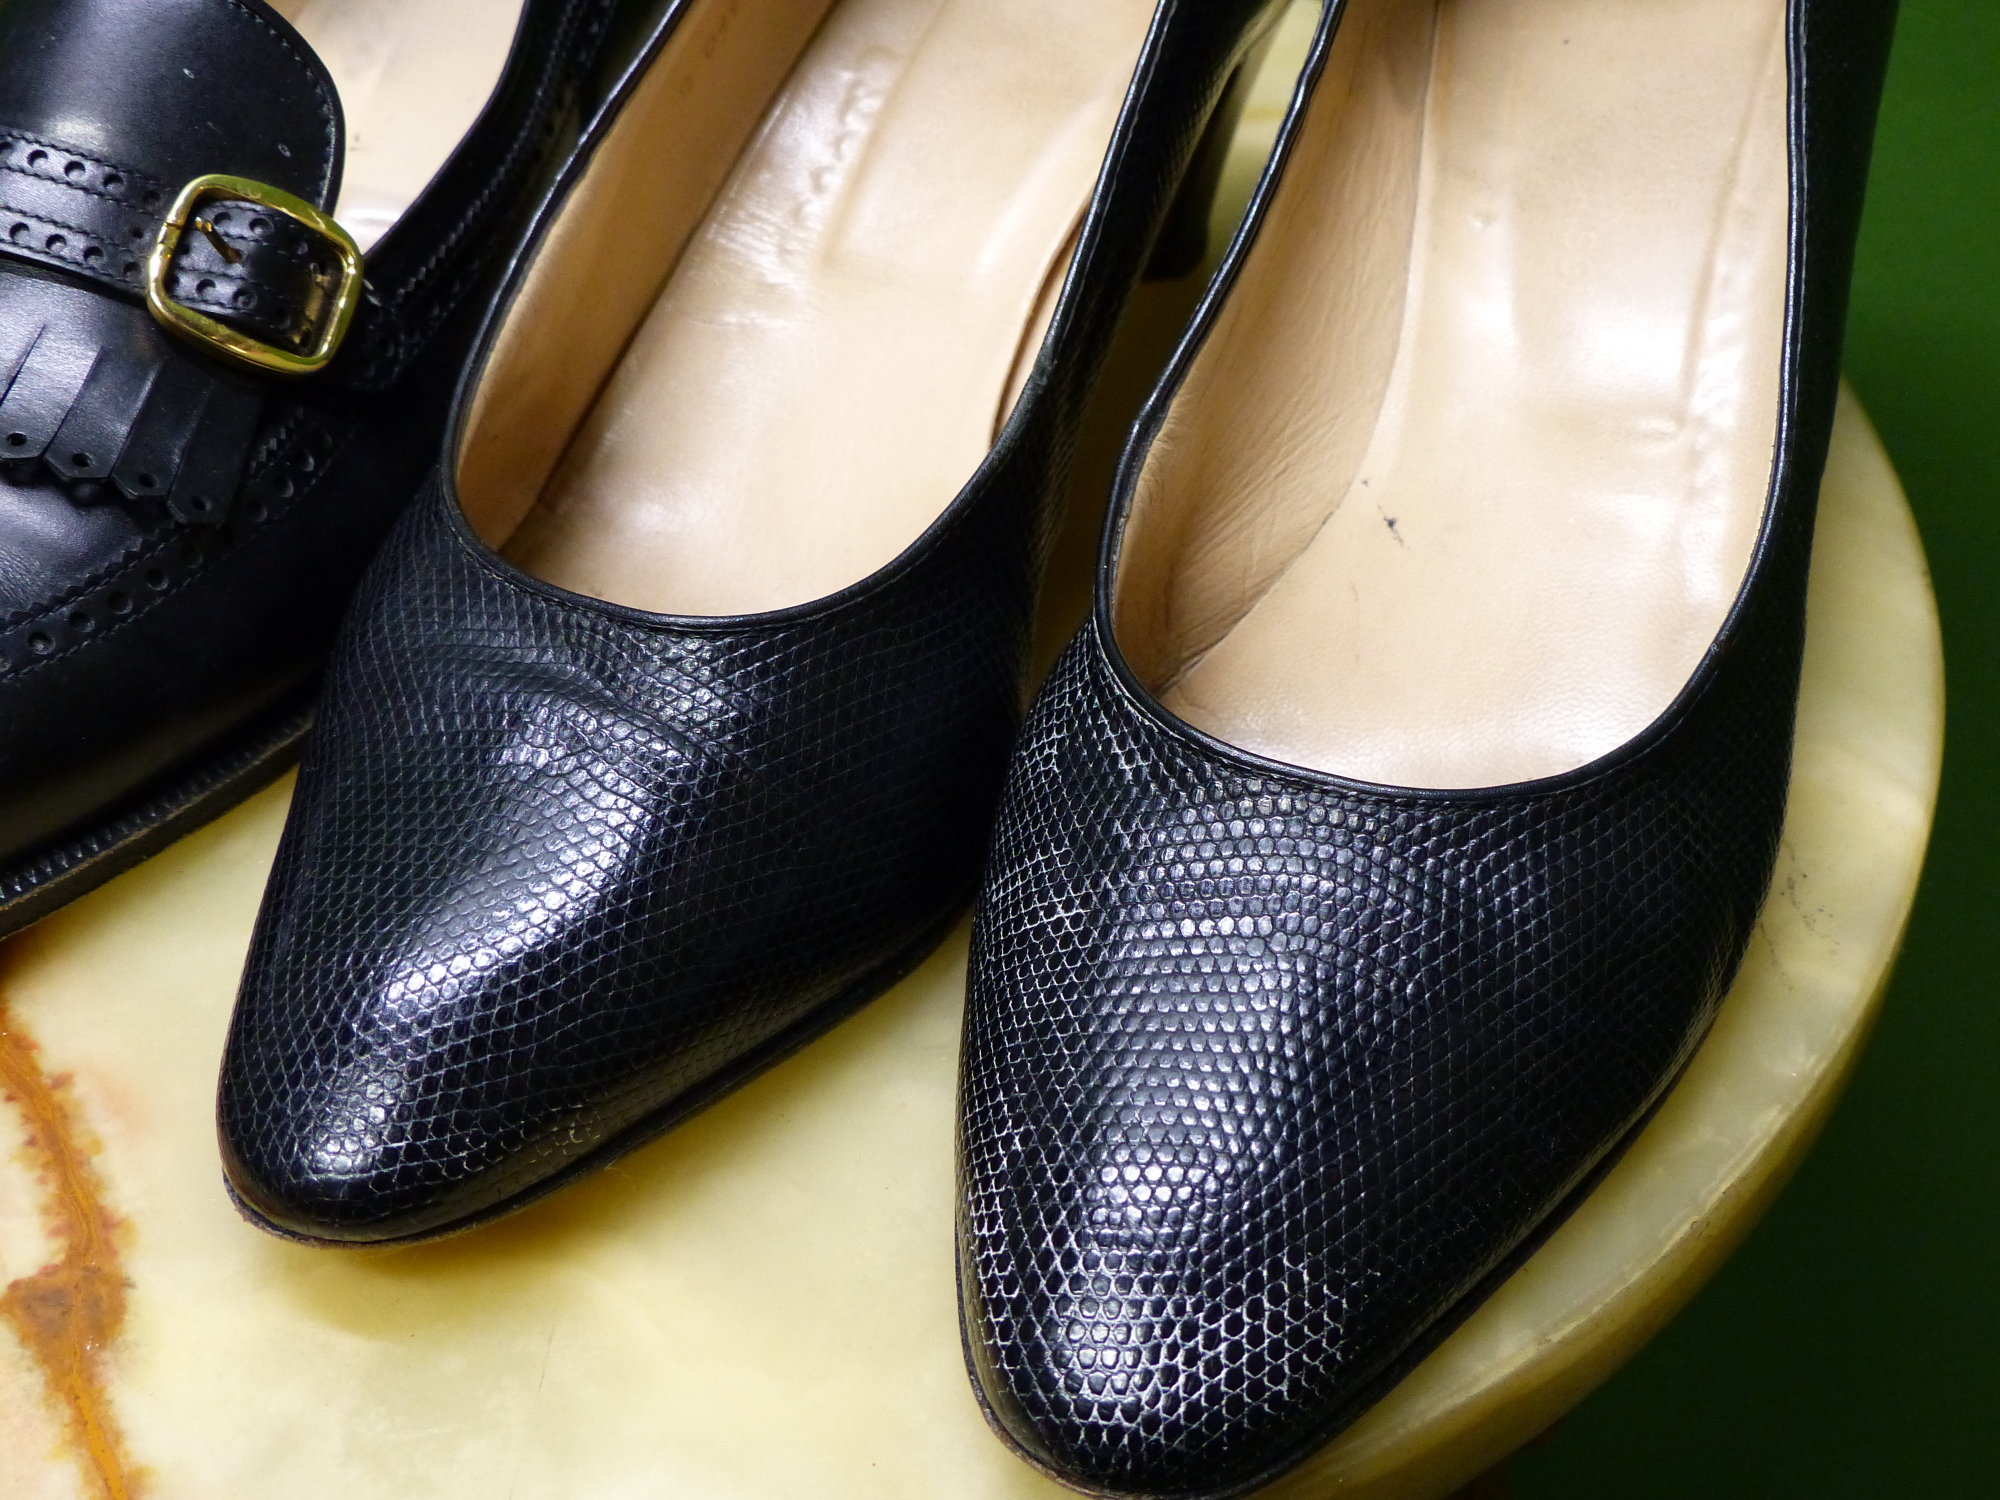 SHOES. TWO PAIRS TANINO CRISCI BLACK HEALS EUR SIZE 39. BLACK LOAFERS EUR SIZE 39. - Image 4 of 11